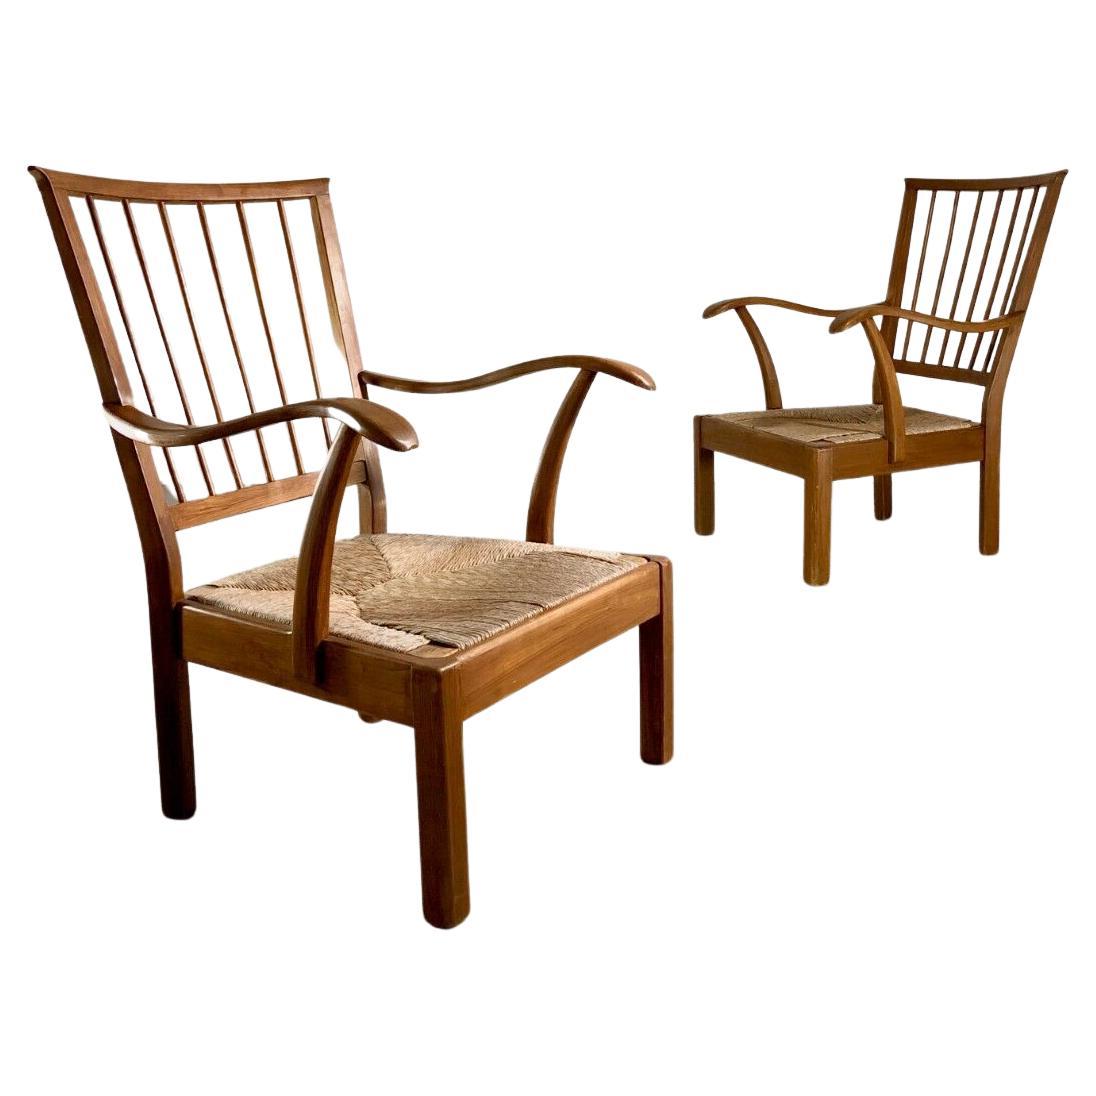 A Pair of SCANDINAVIAN Style, MID-CENTURY MODERN RUSTIC ARMCHAIRS, France 1950